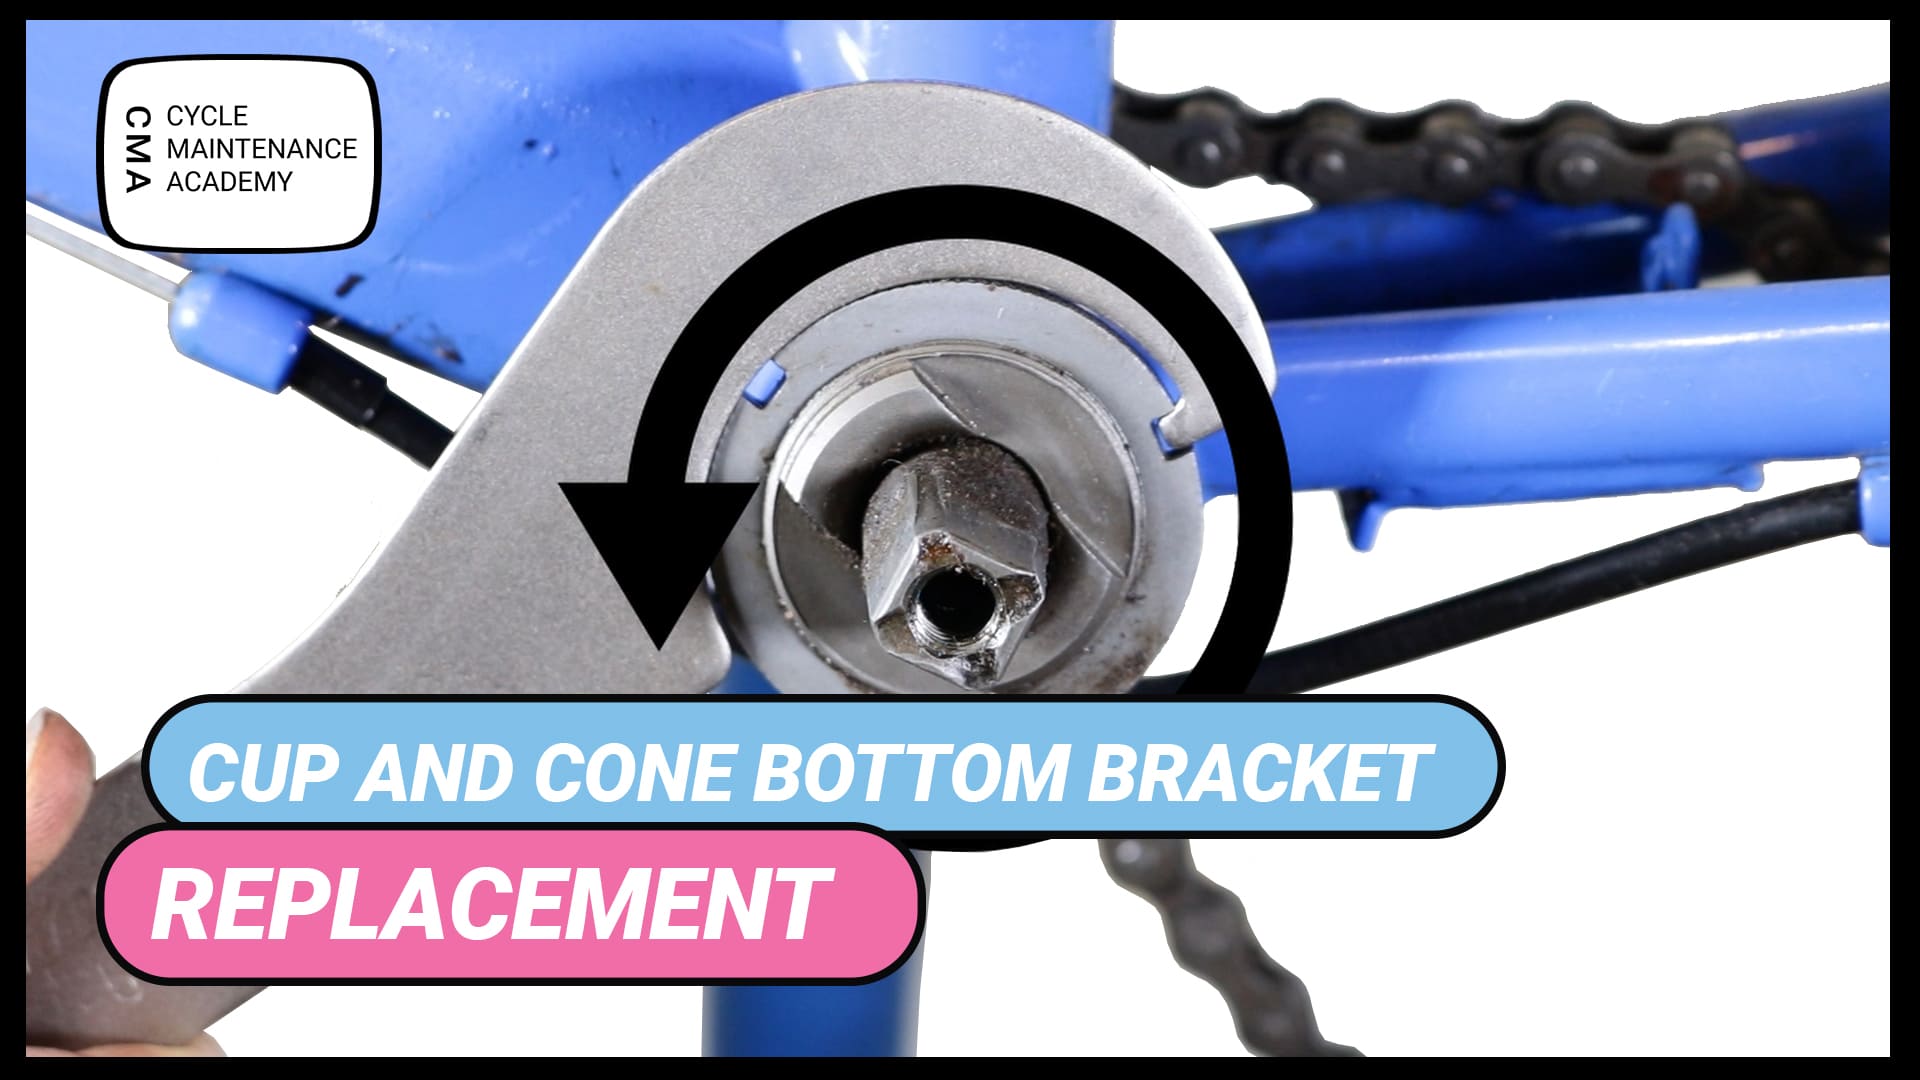 Cup and cone bottom bracket replacement - Cycle Maintenance Academy